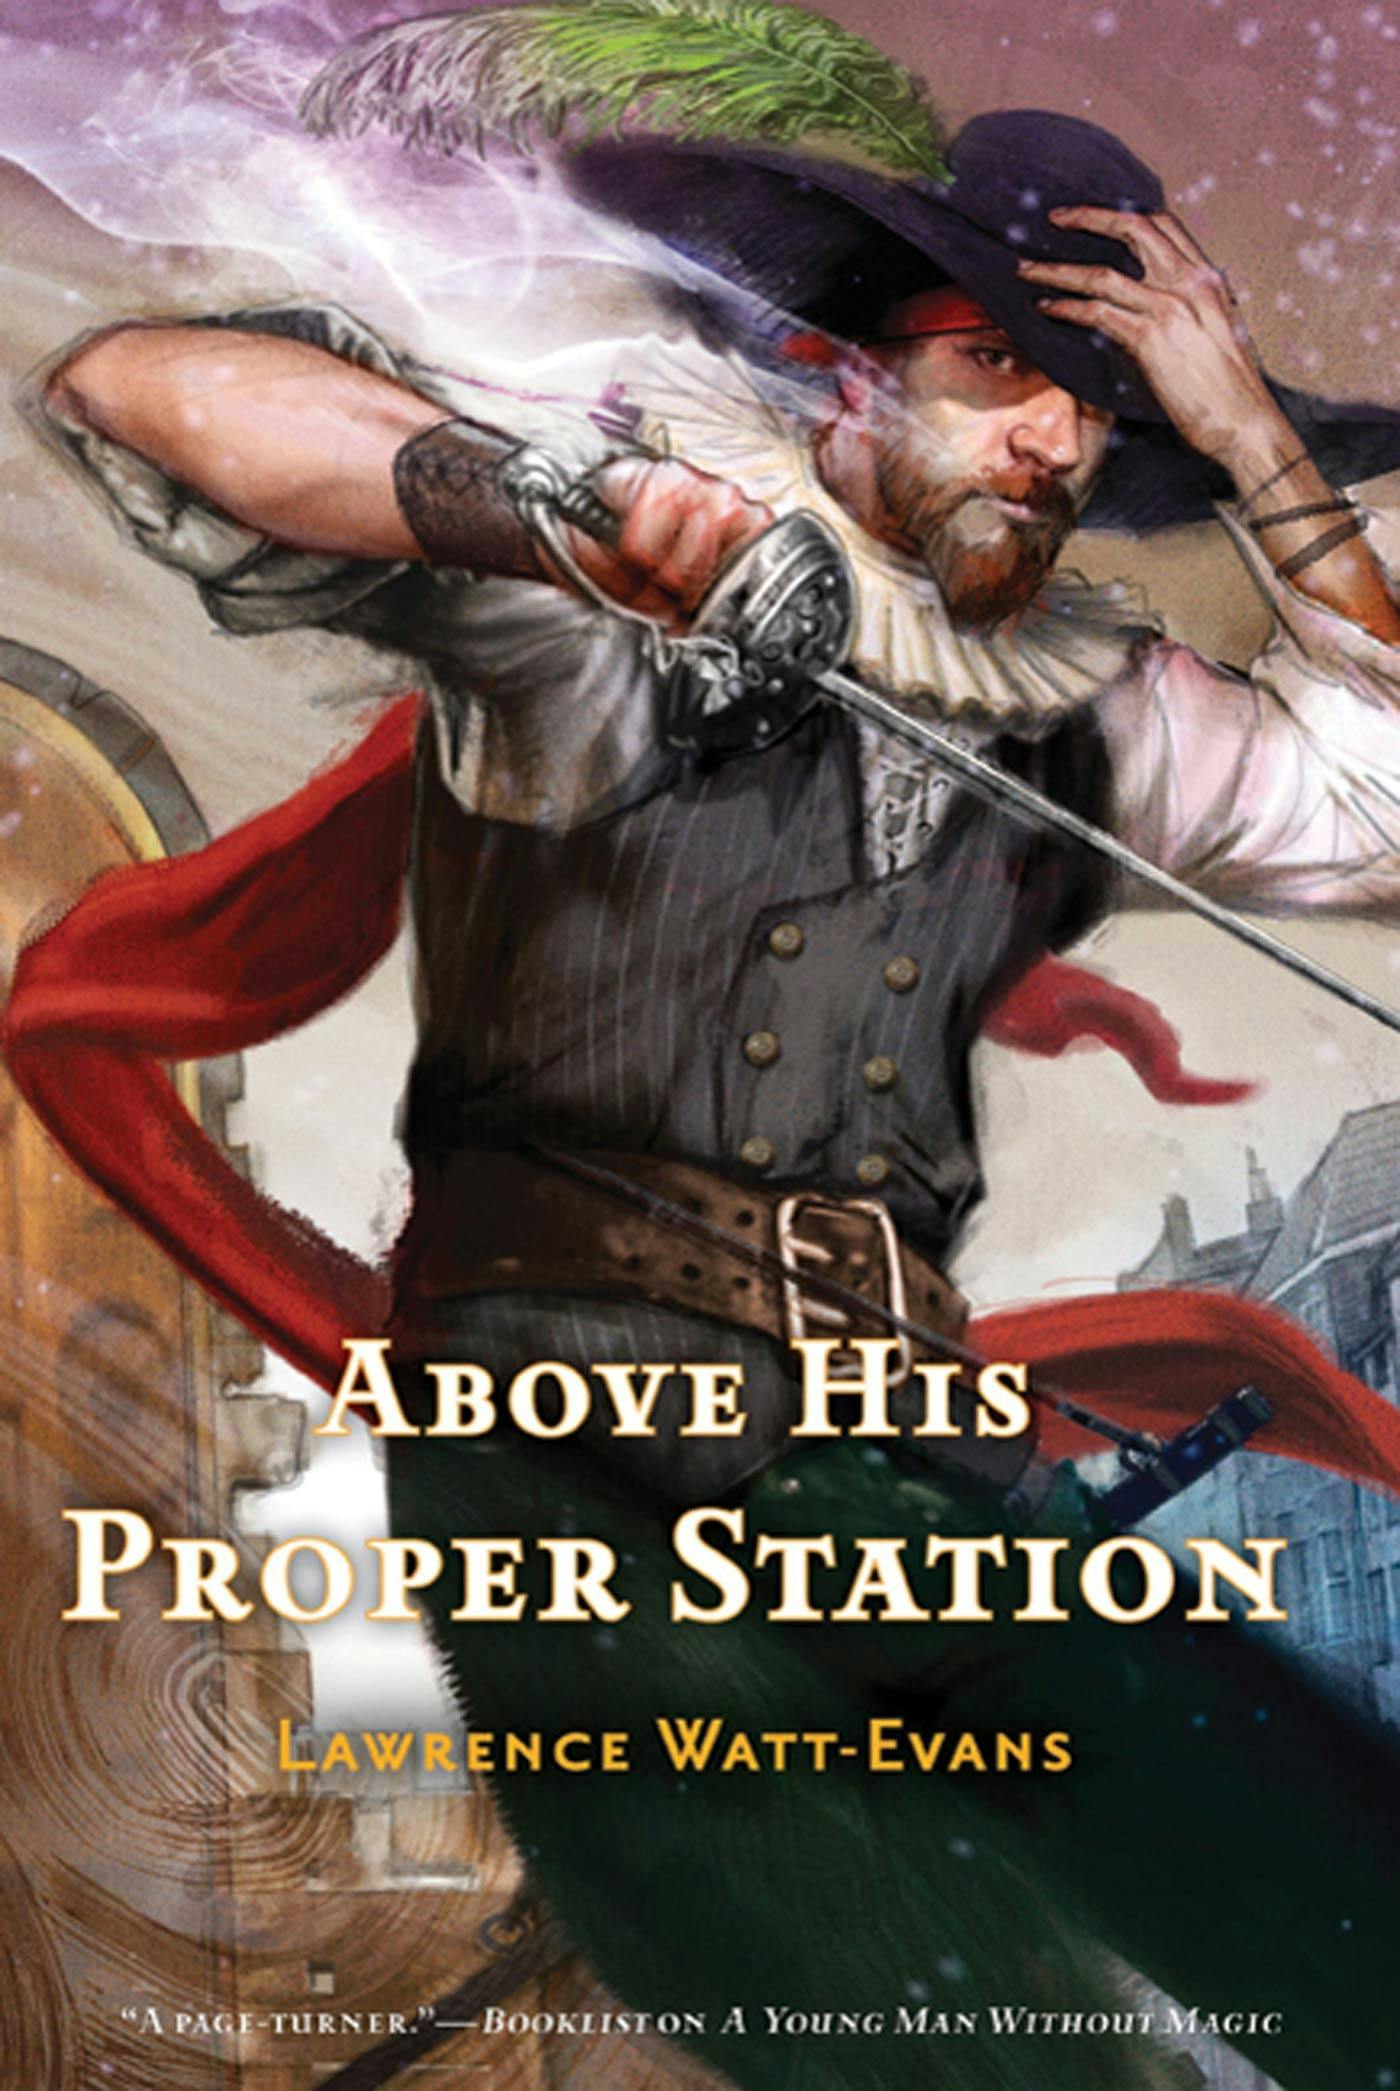 Cover for the book titled as: Above His Proper Station